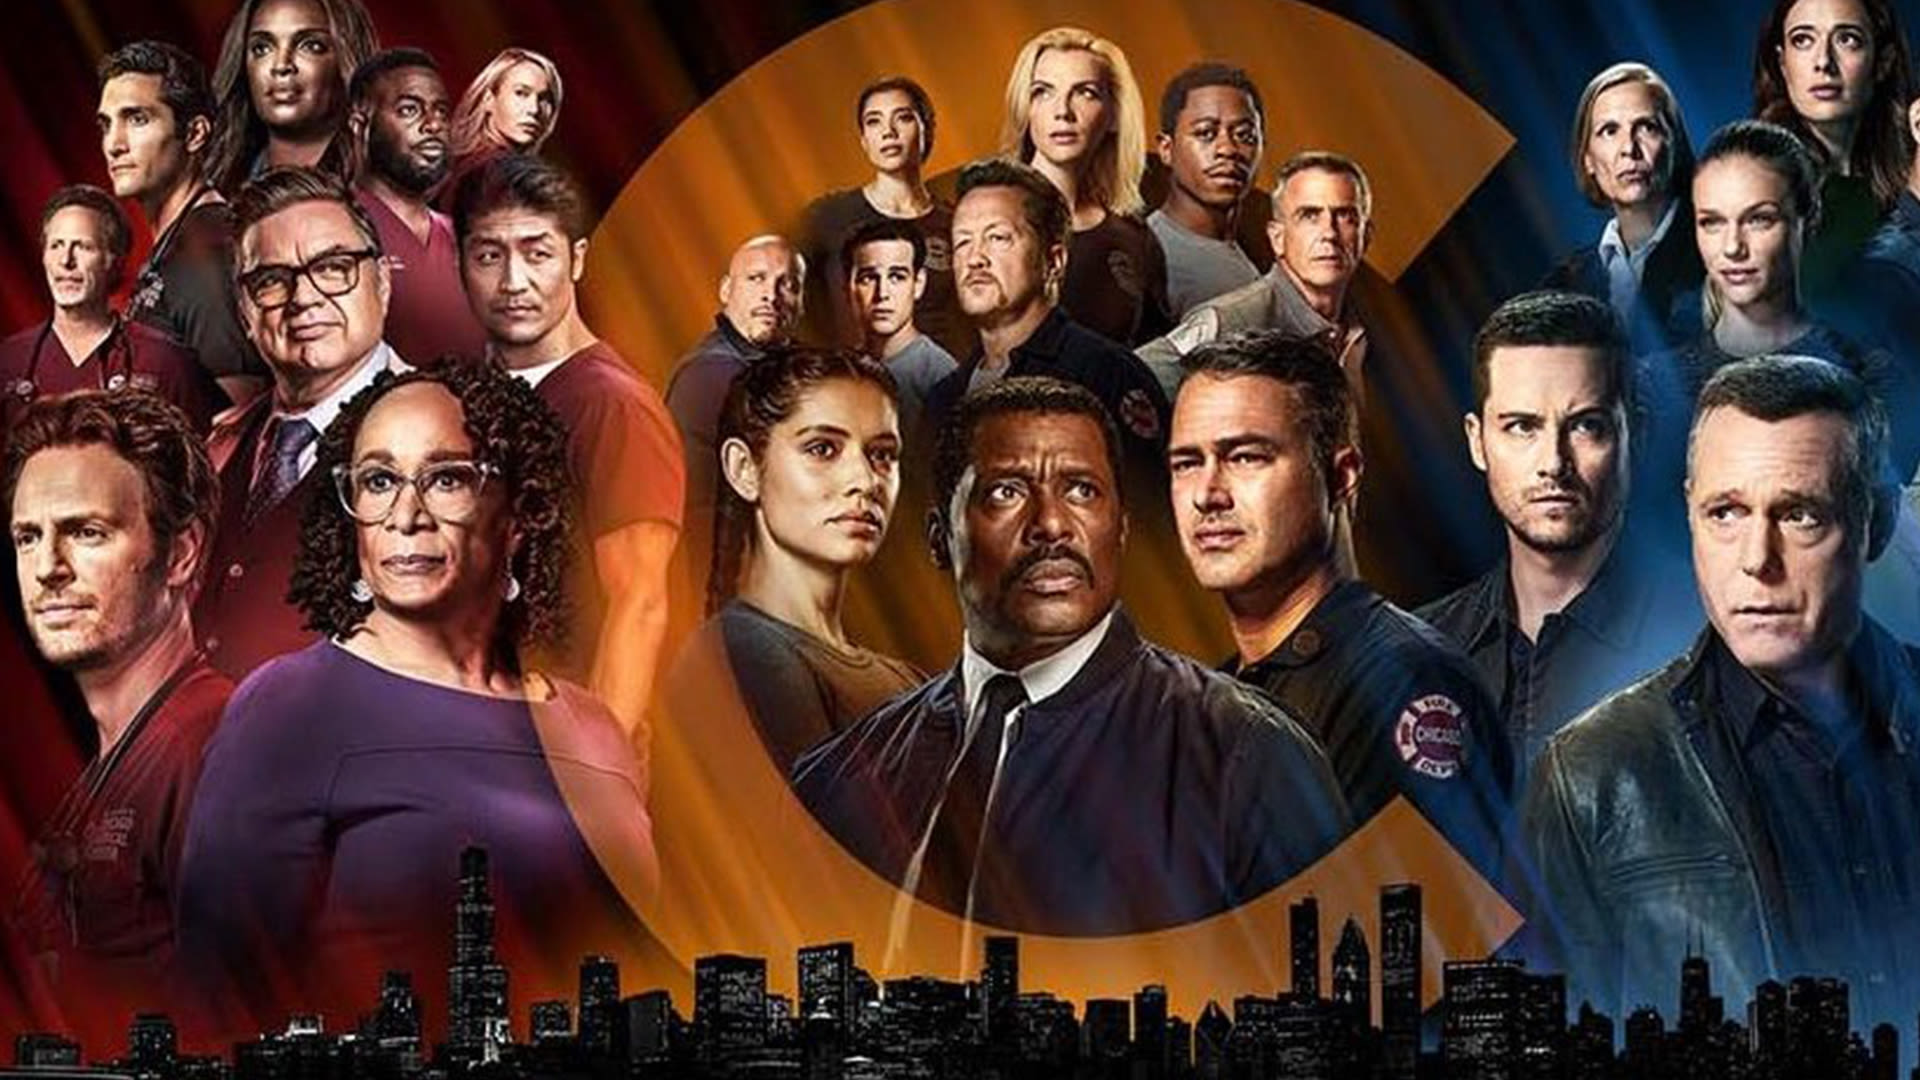 Chicago Fire star to exit show after 12 seasons as fans left shocked